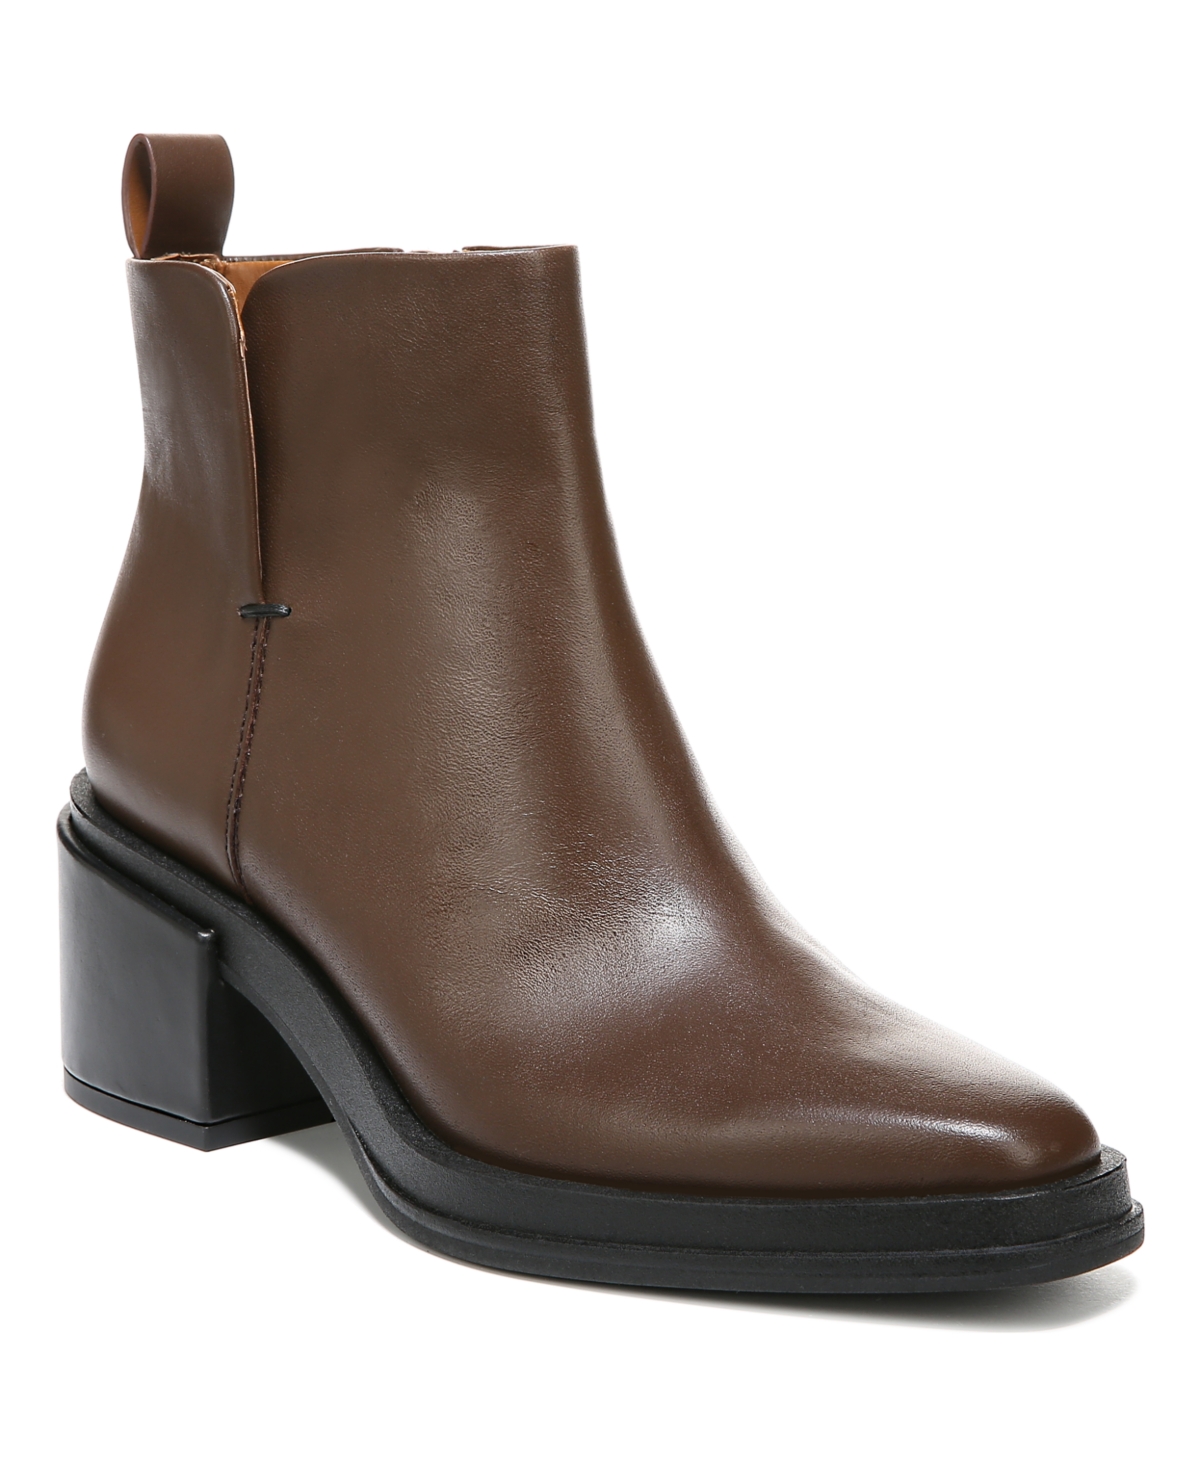 Dalden Booties - Umber Brown Leather